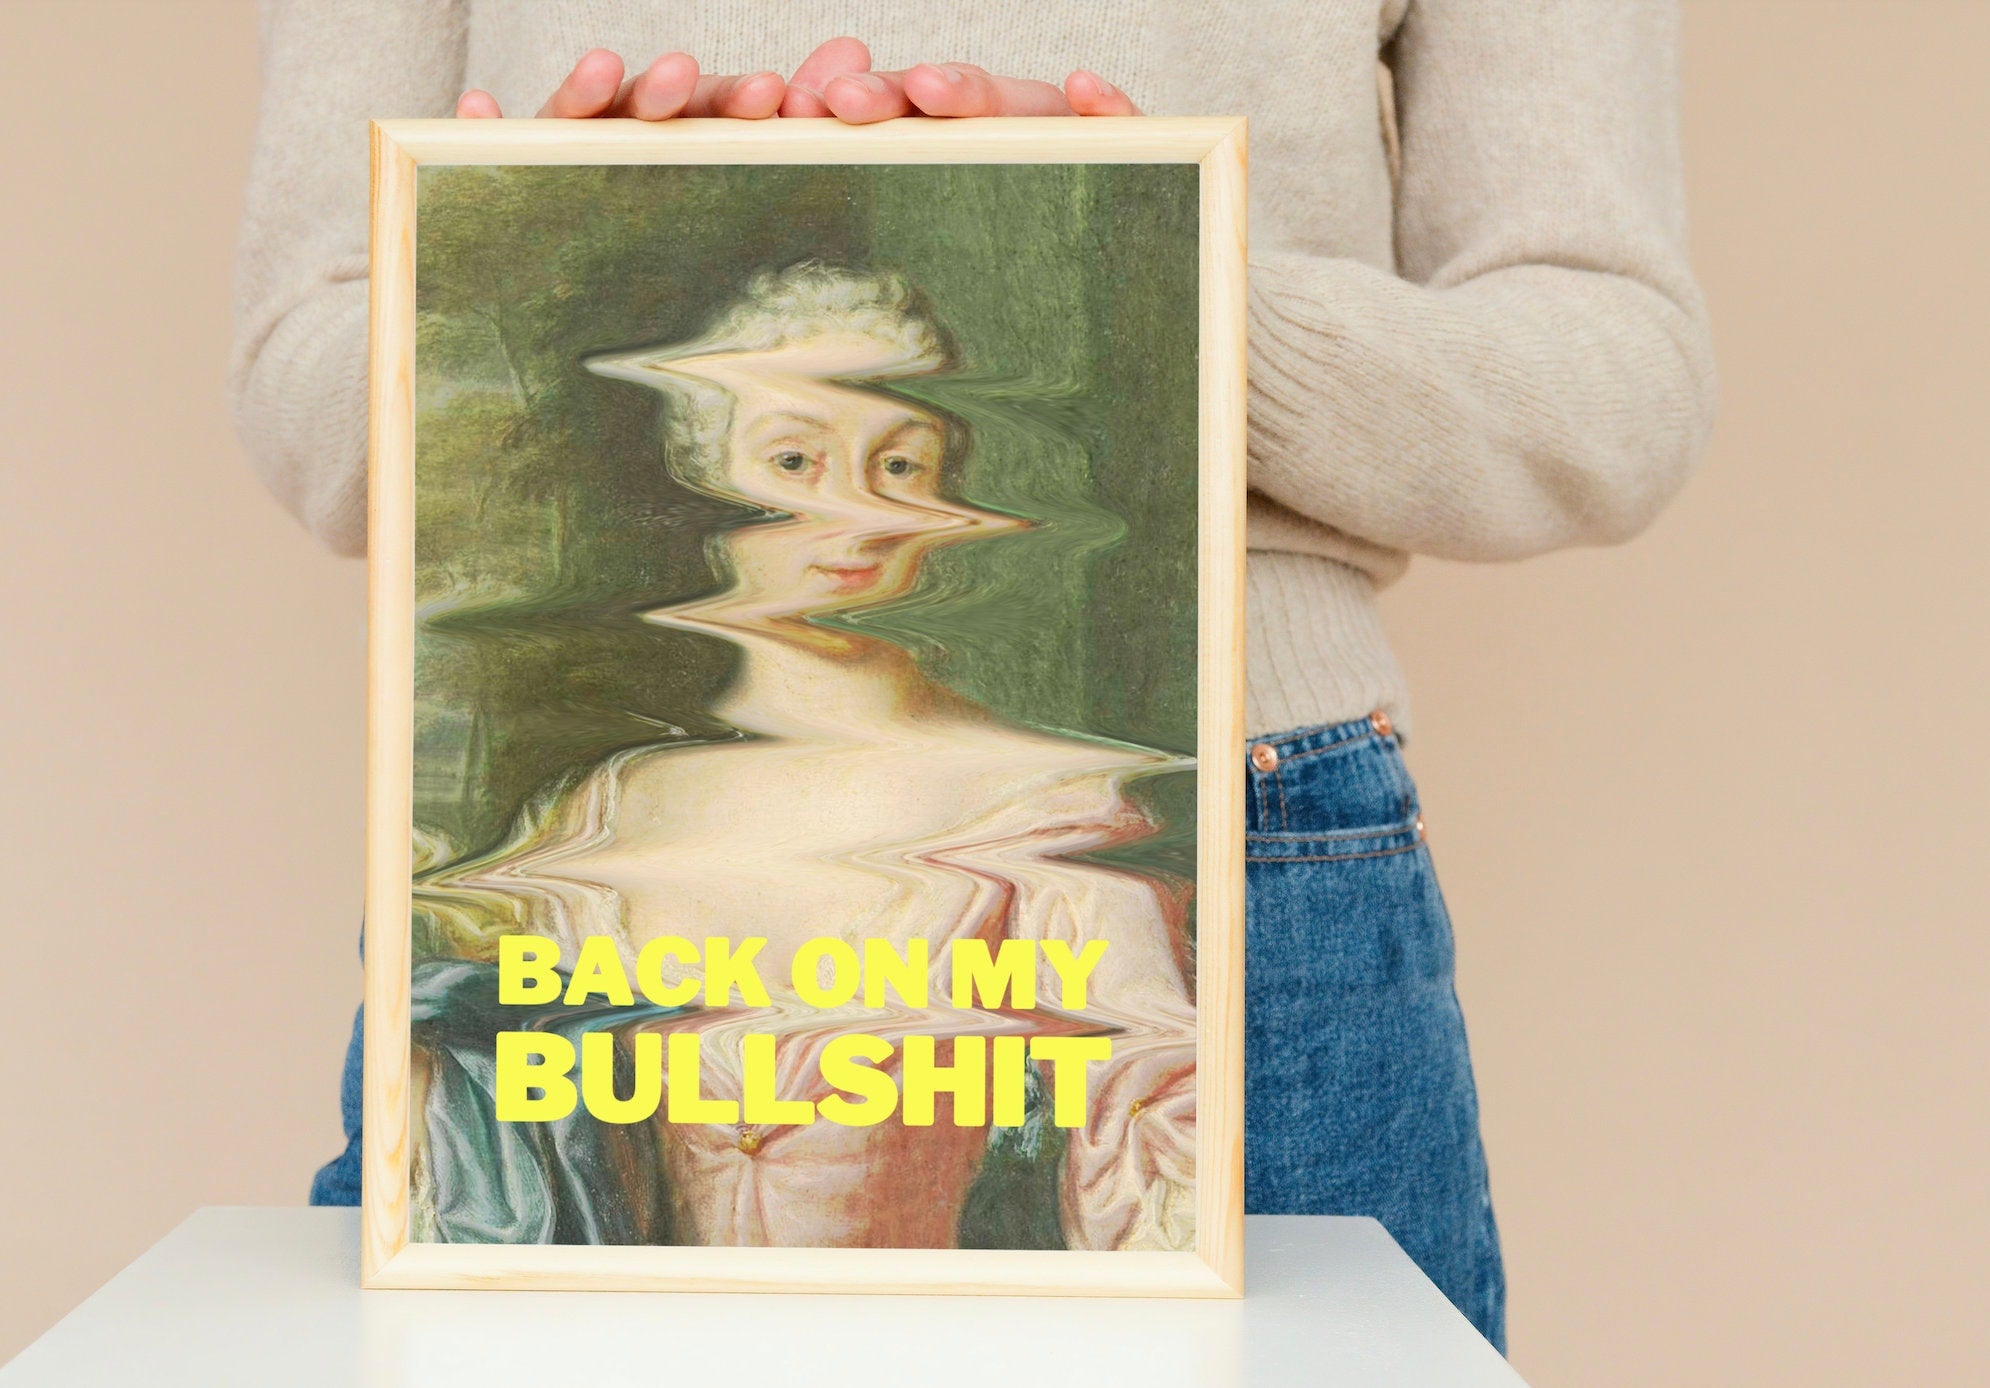 Inspirational digital print with 'Back on my Bullshit' message, perfect for motivational decor.